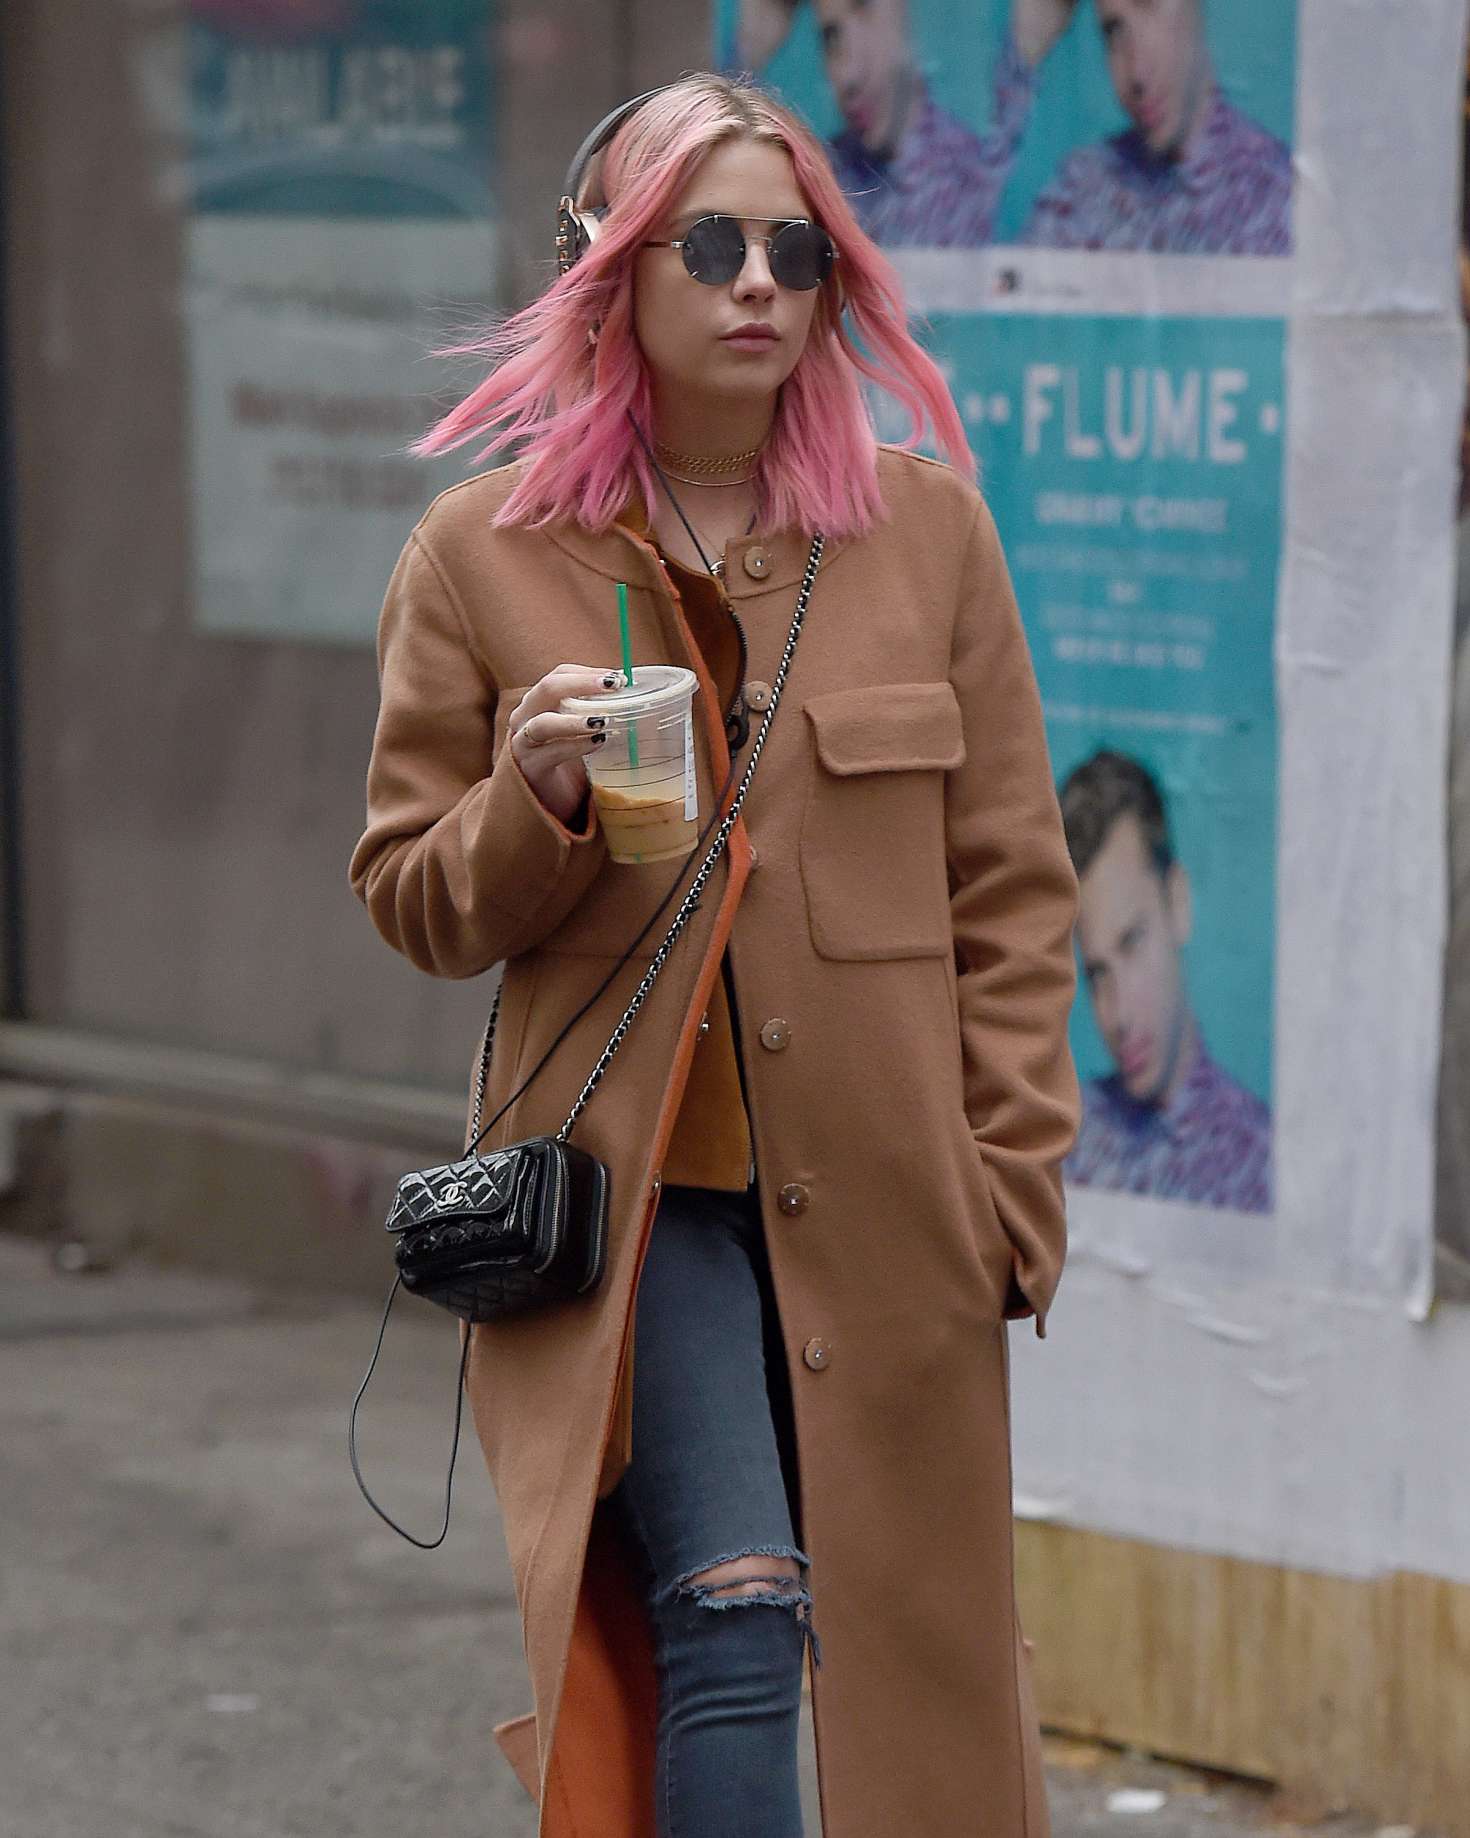 Ashley Benson 2016 : Ashley Benson in a beige coat while listening to music -09